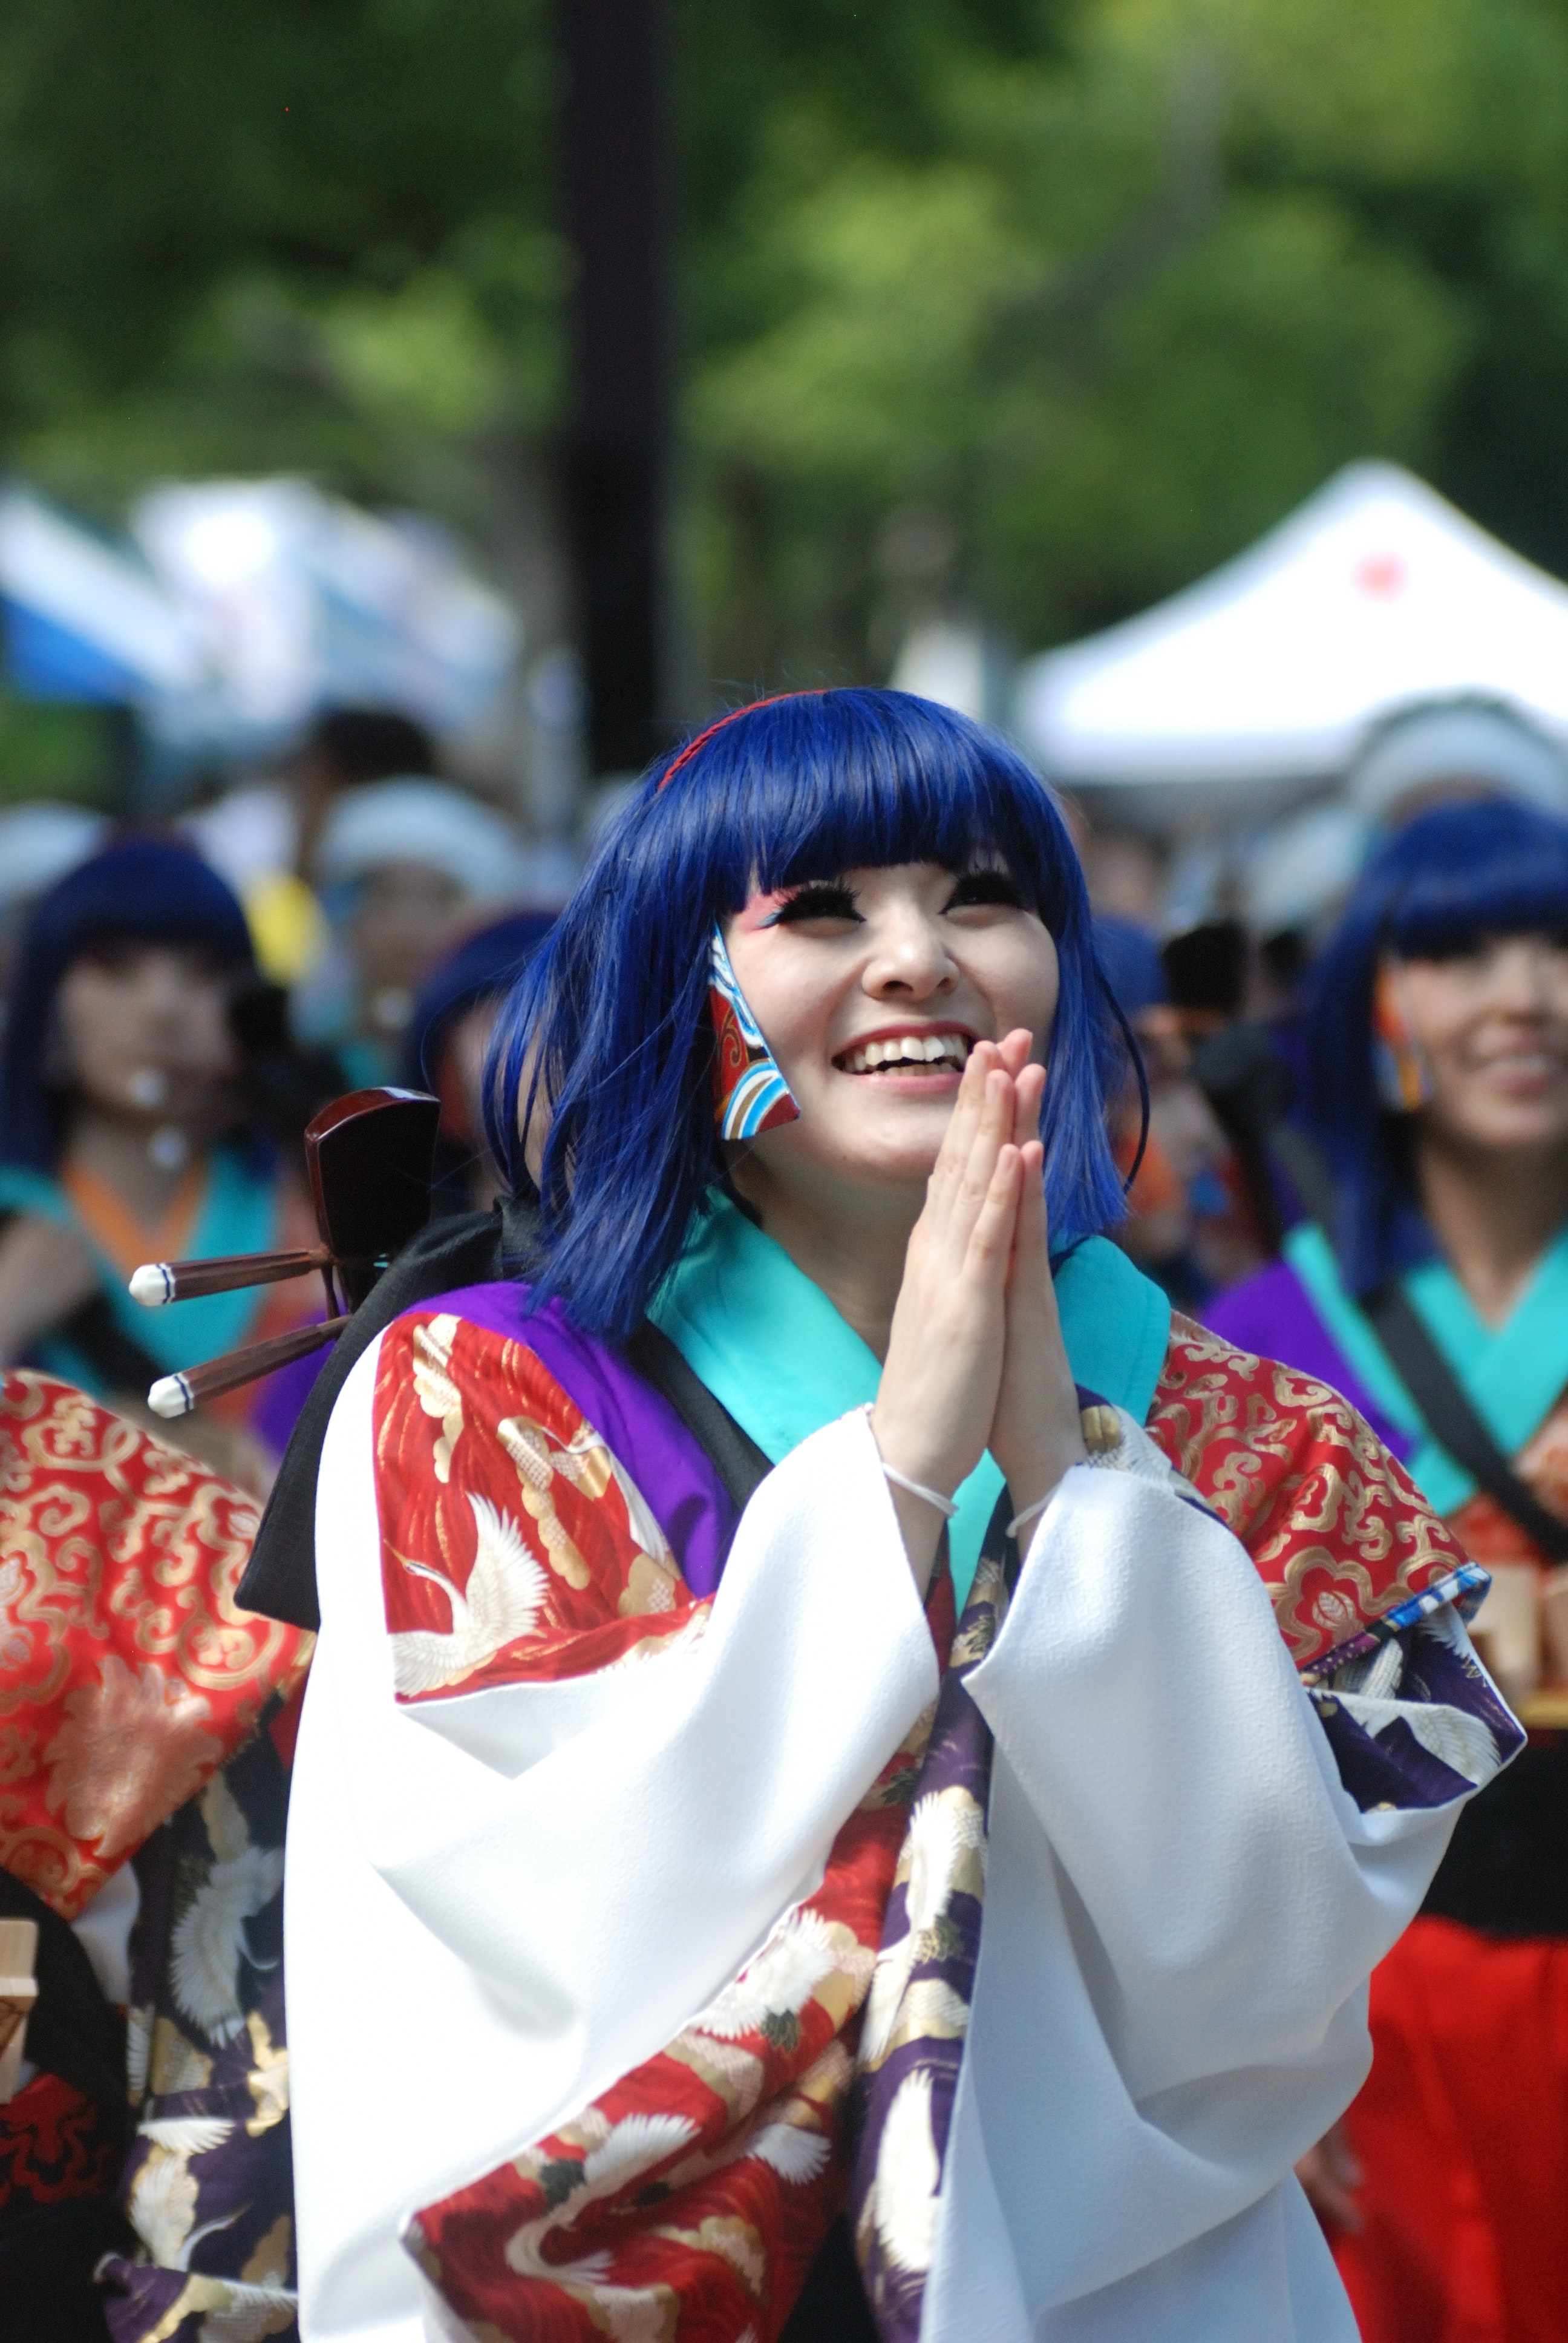 Woman in blue hair wearing costume during daytime photo